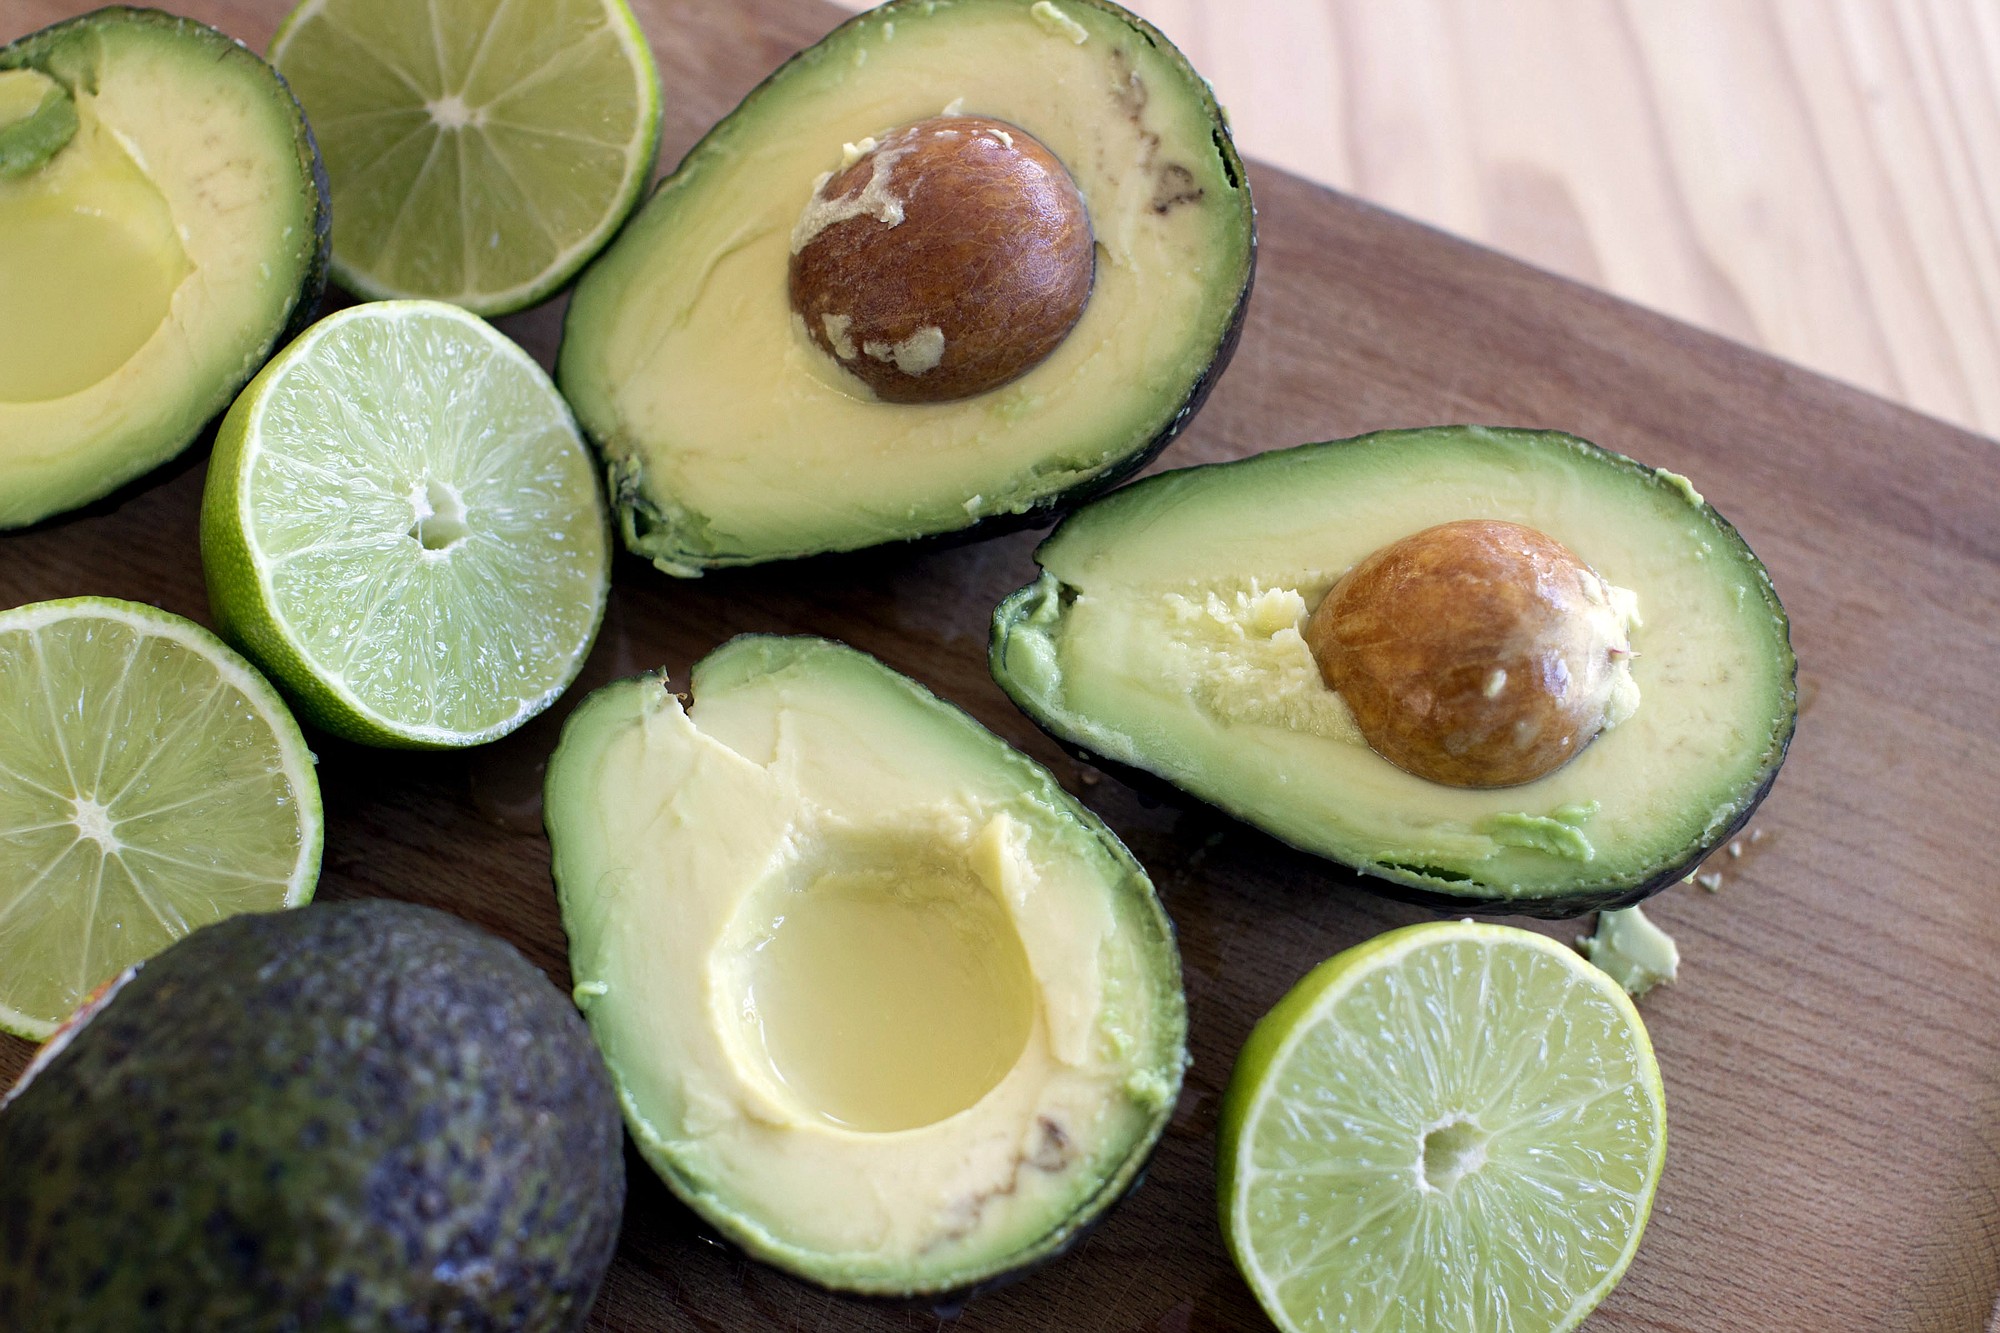 Avocados and limes, key ingredients for guacamole